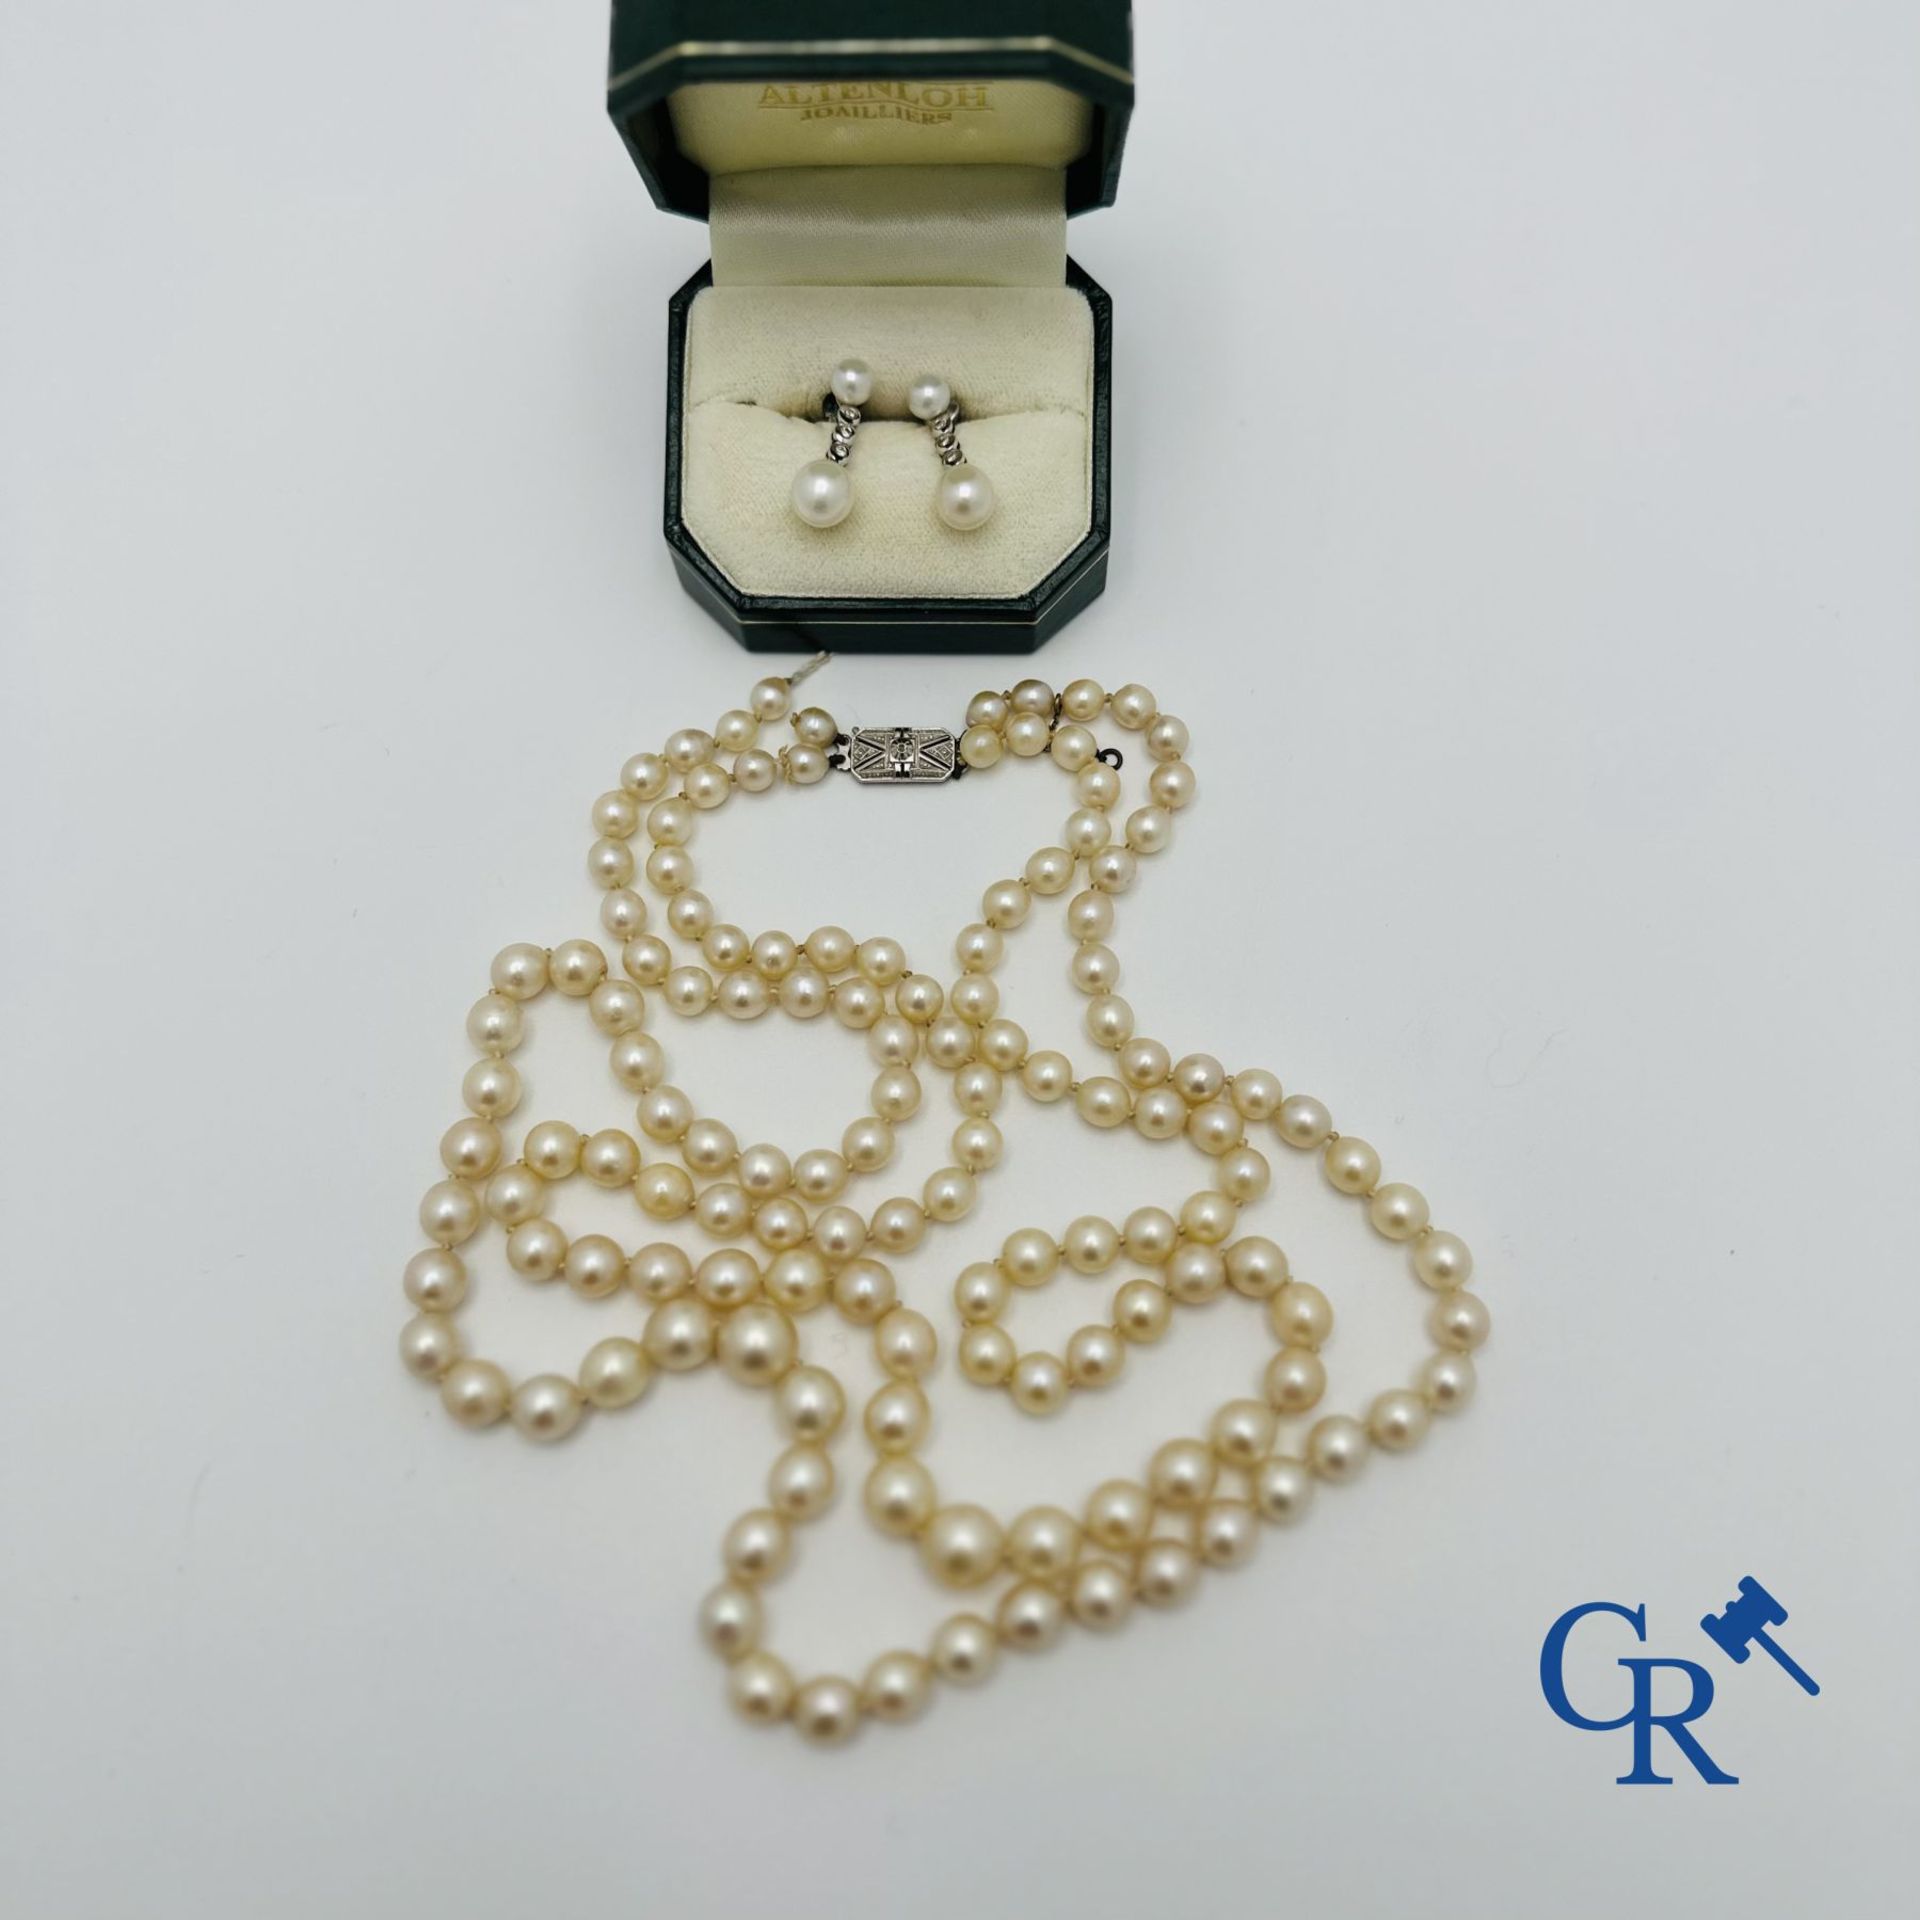 Jewellery: Lot consisting of a pearl necklace with gold clasp 18K and a pair of earrings in white go